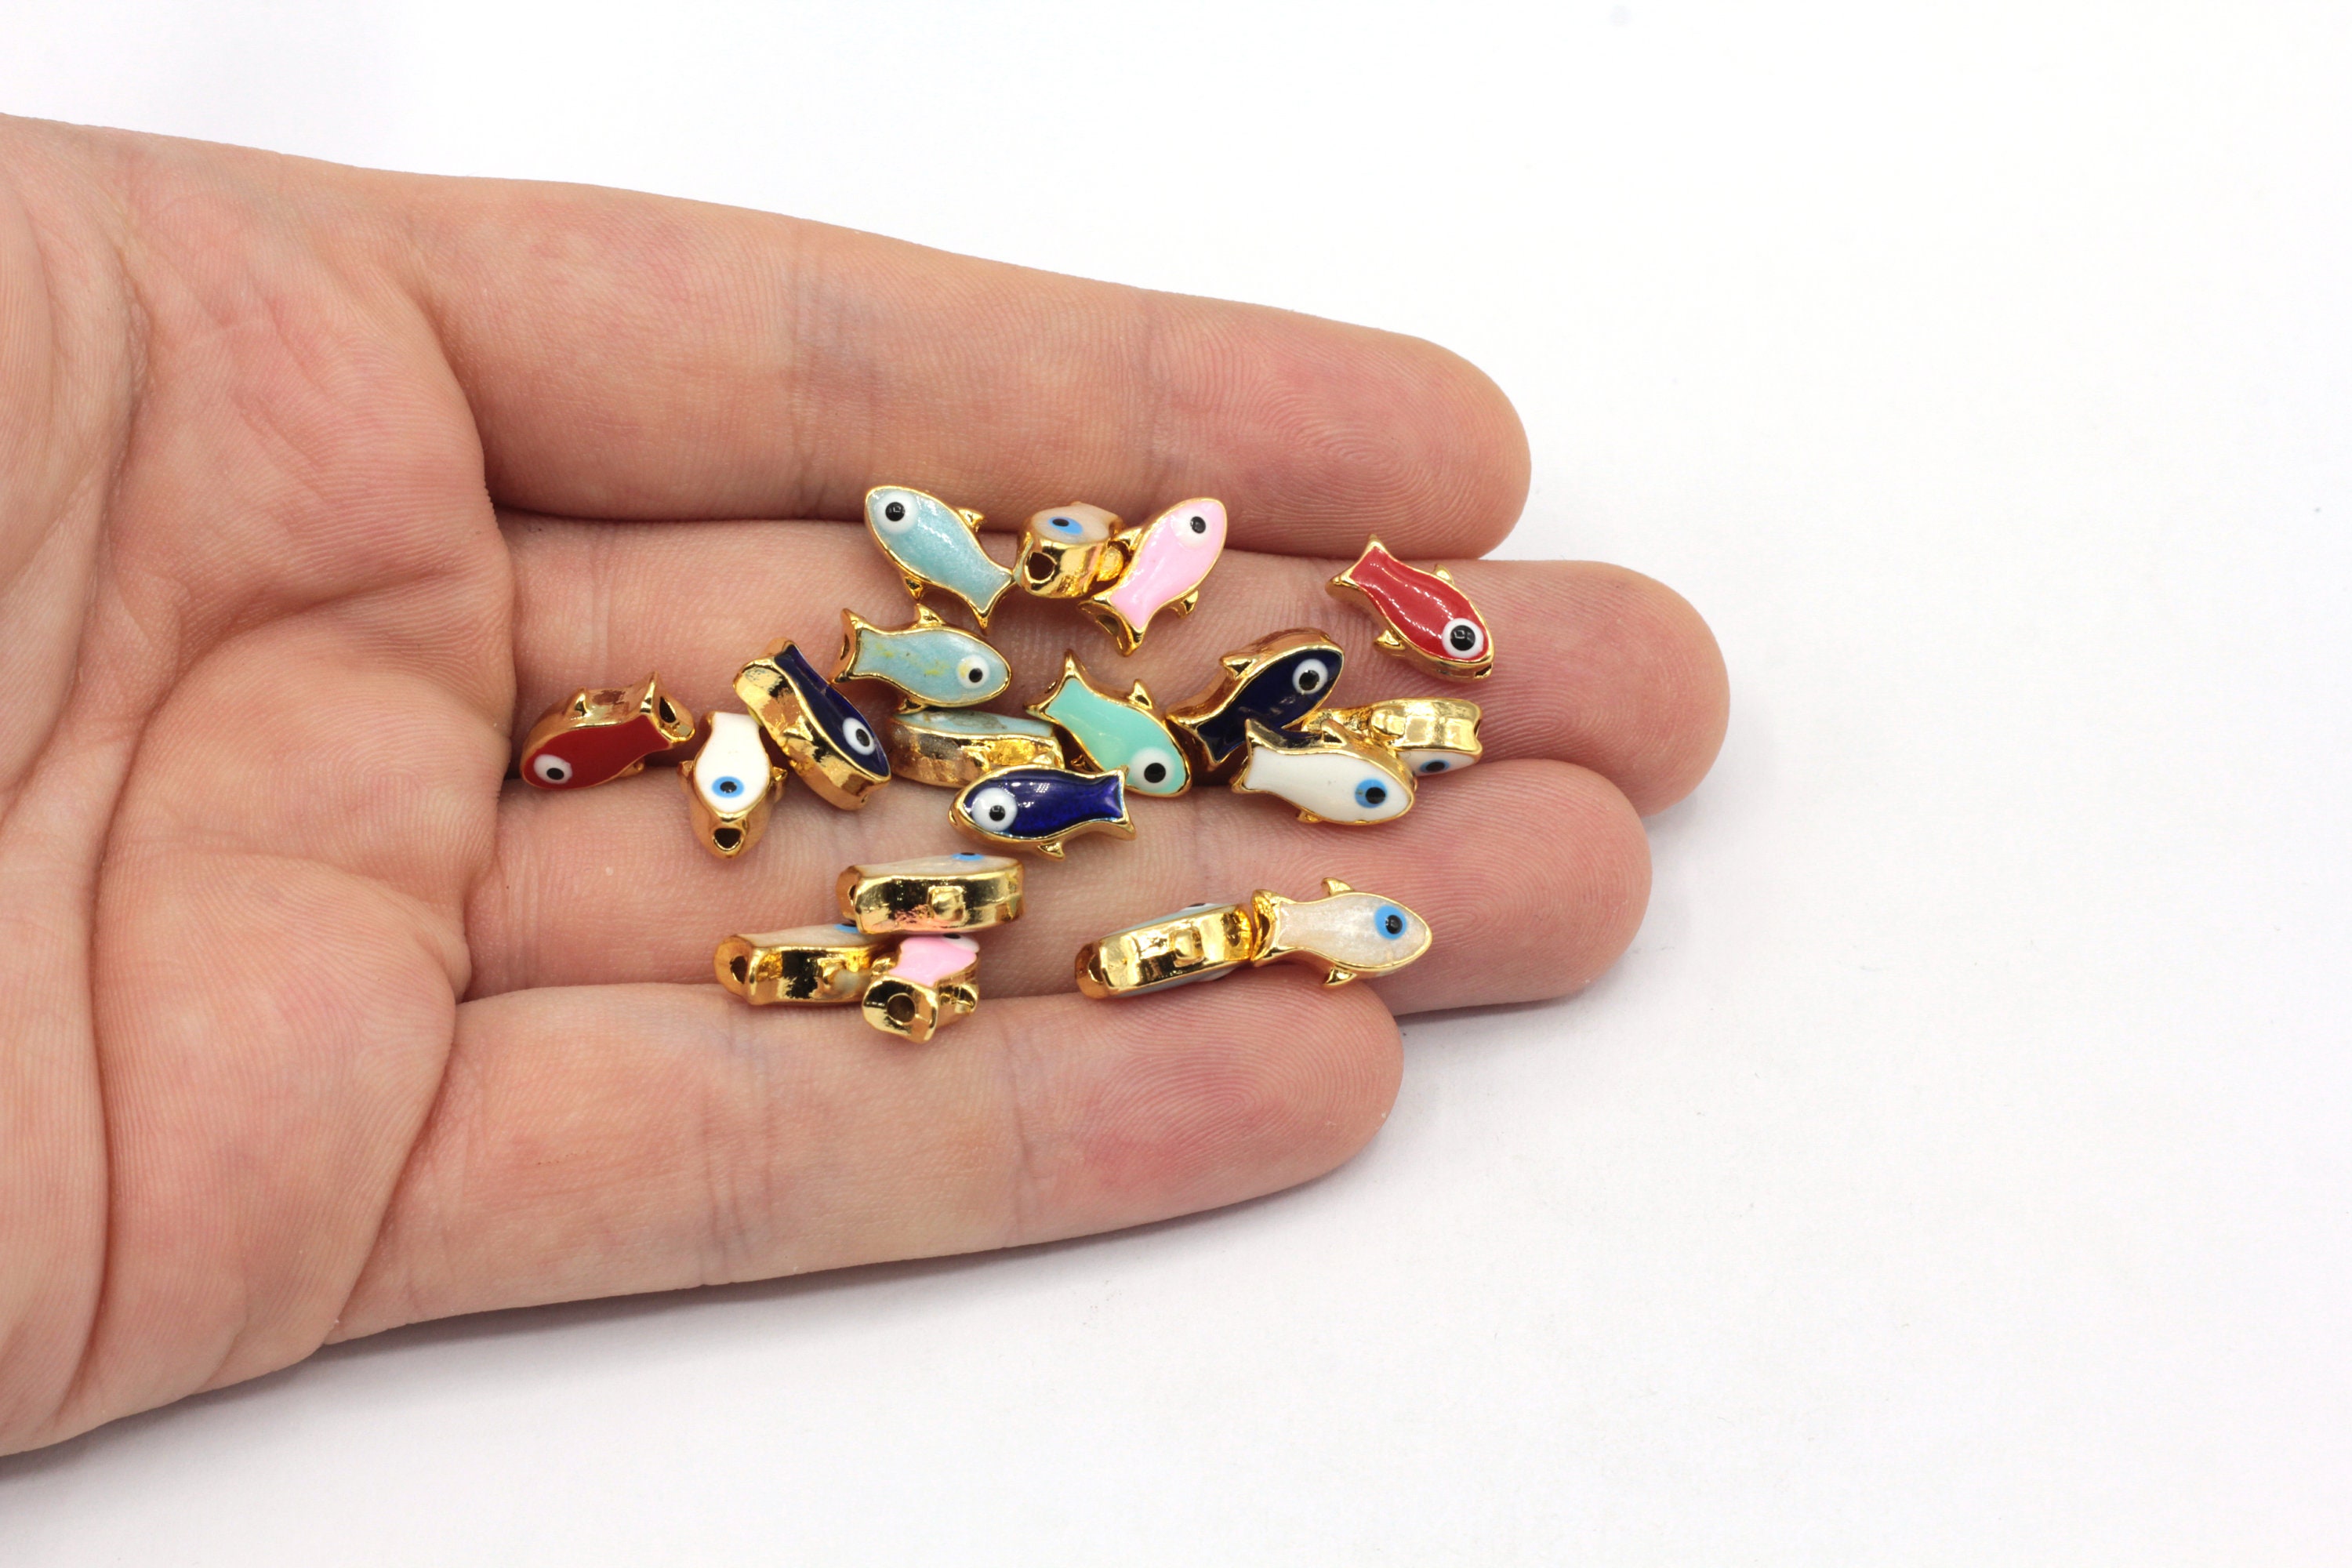 70pcs Enameled Colorful Assorted Charms, Cubic Charms, Bulk Charms,pendants,  Gold Tone Charms, DIY Charms, Cute Charms for Jewelry Making 